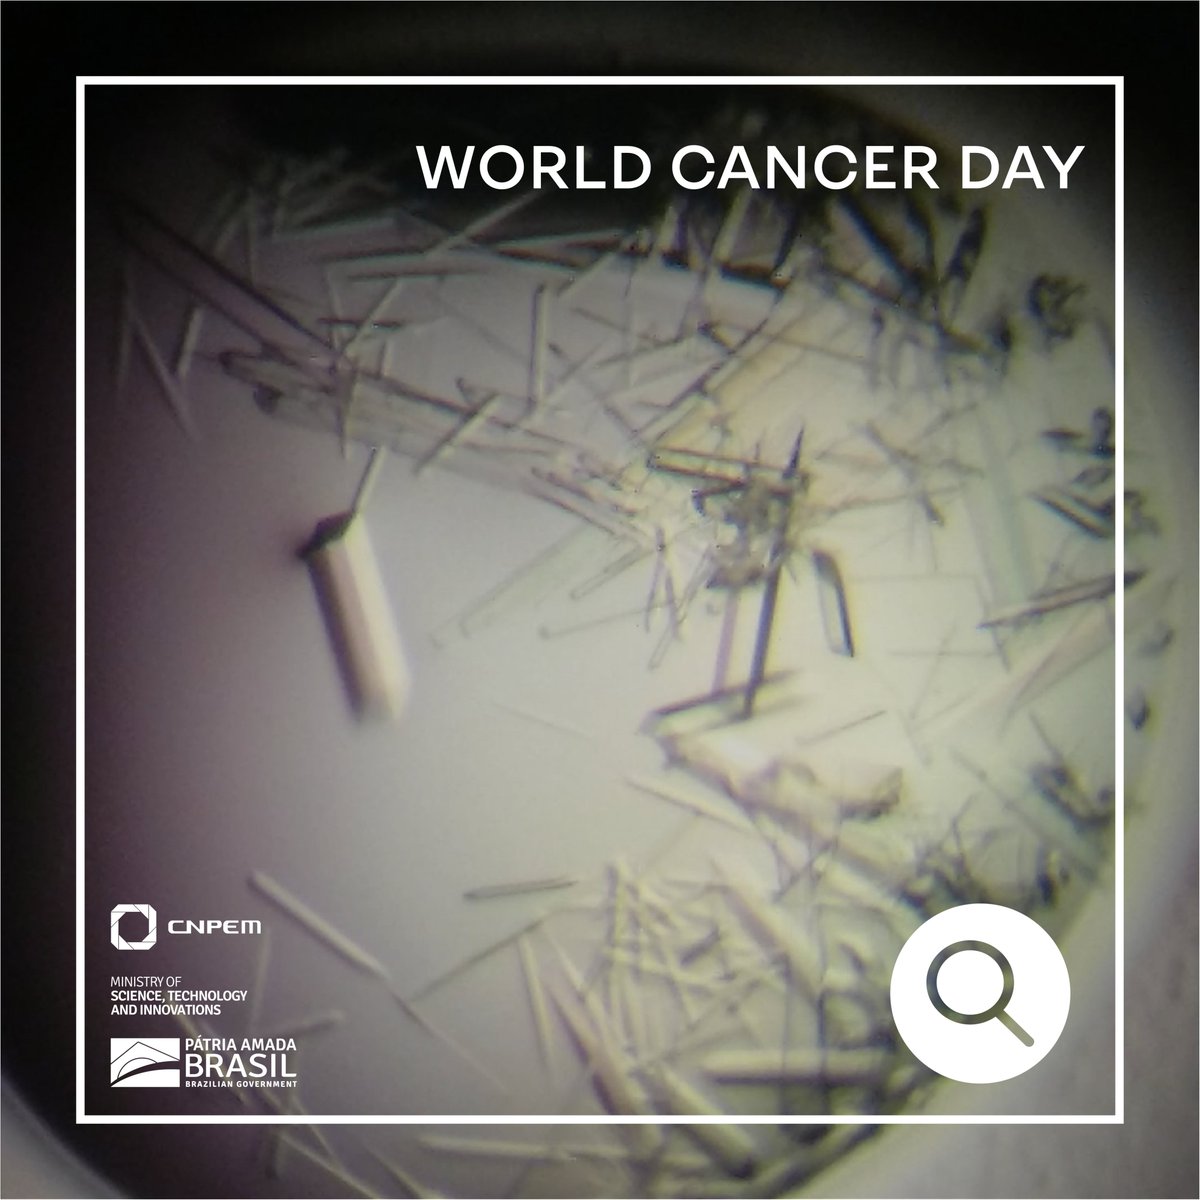 Today is "World Cancer Day".  #CNPEM  #MCTI  #BrazilianScience  #GoSirius  #WorldCancerDay    #LightSourceScience  @lightsources